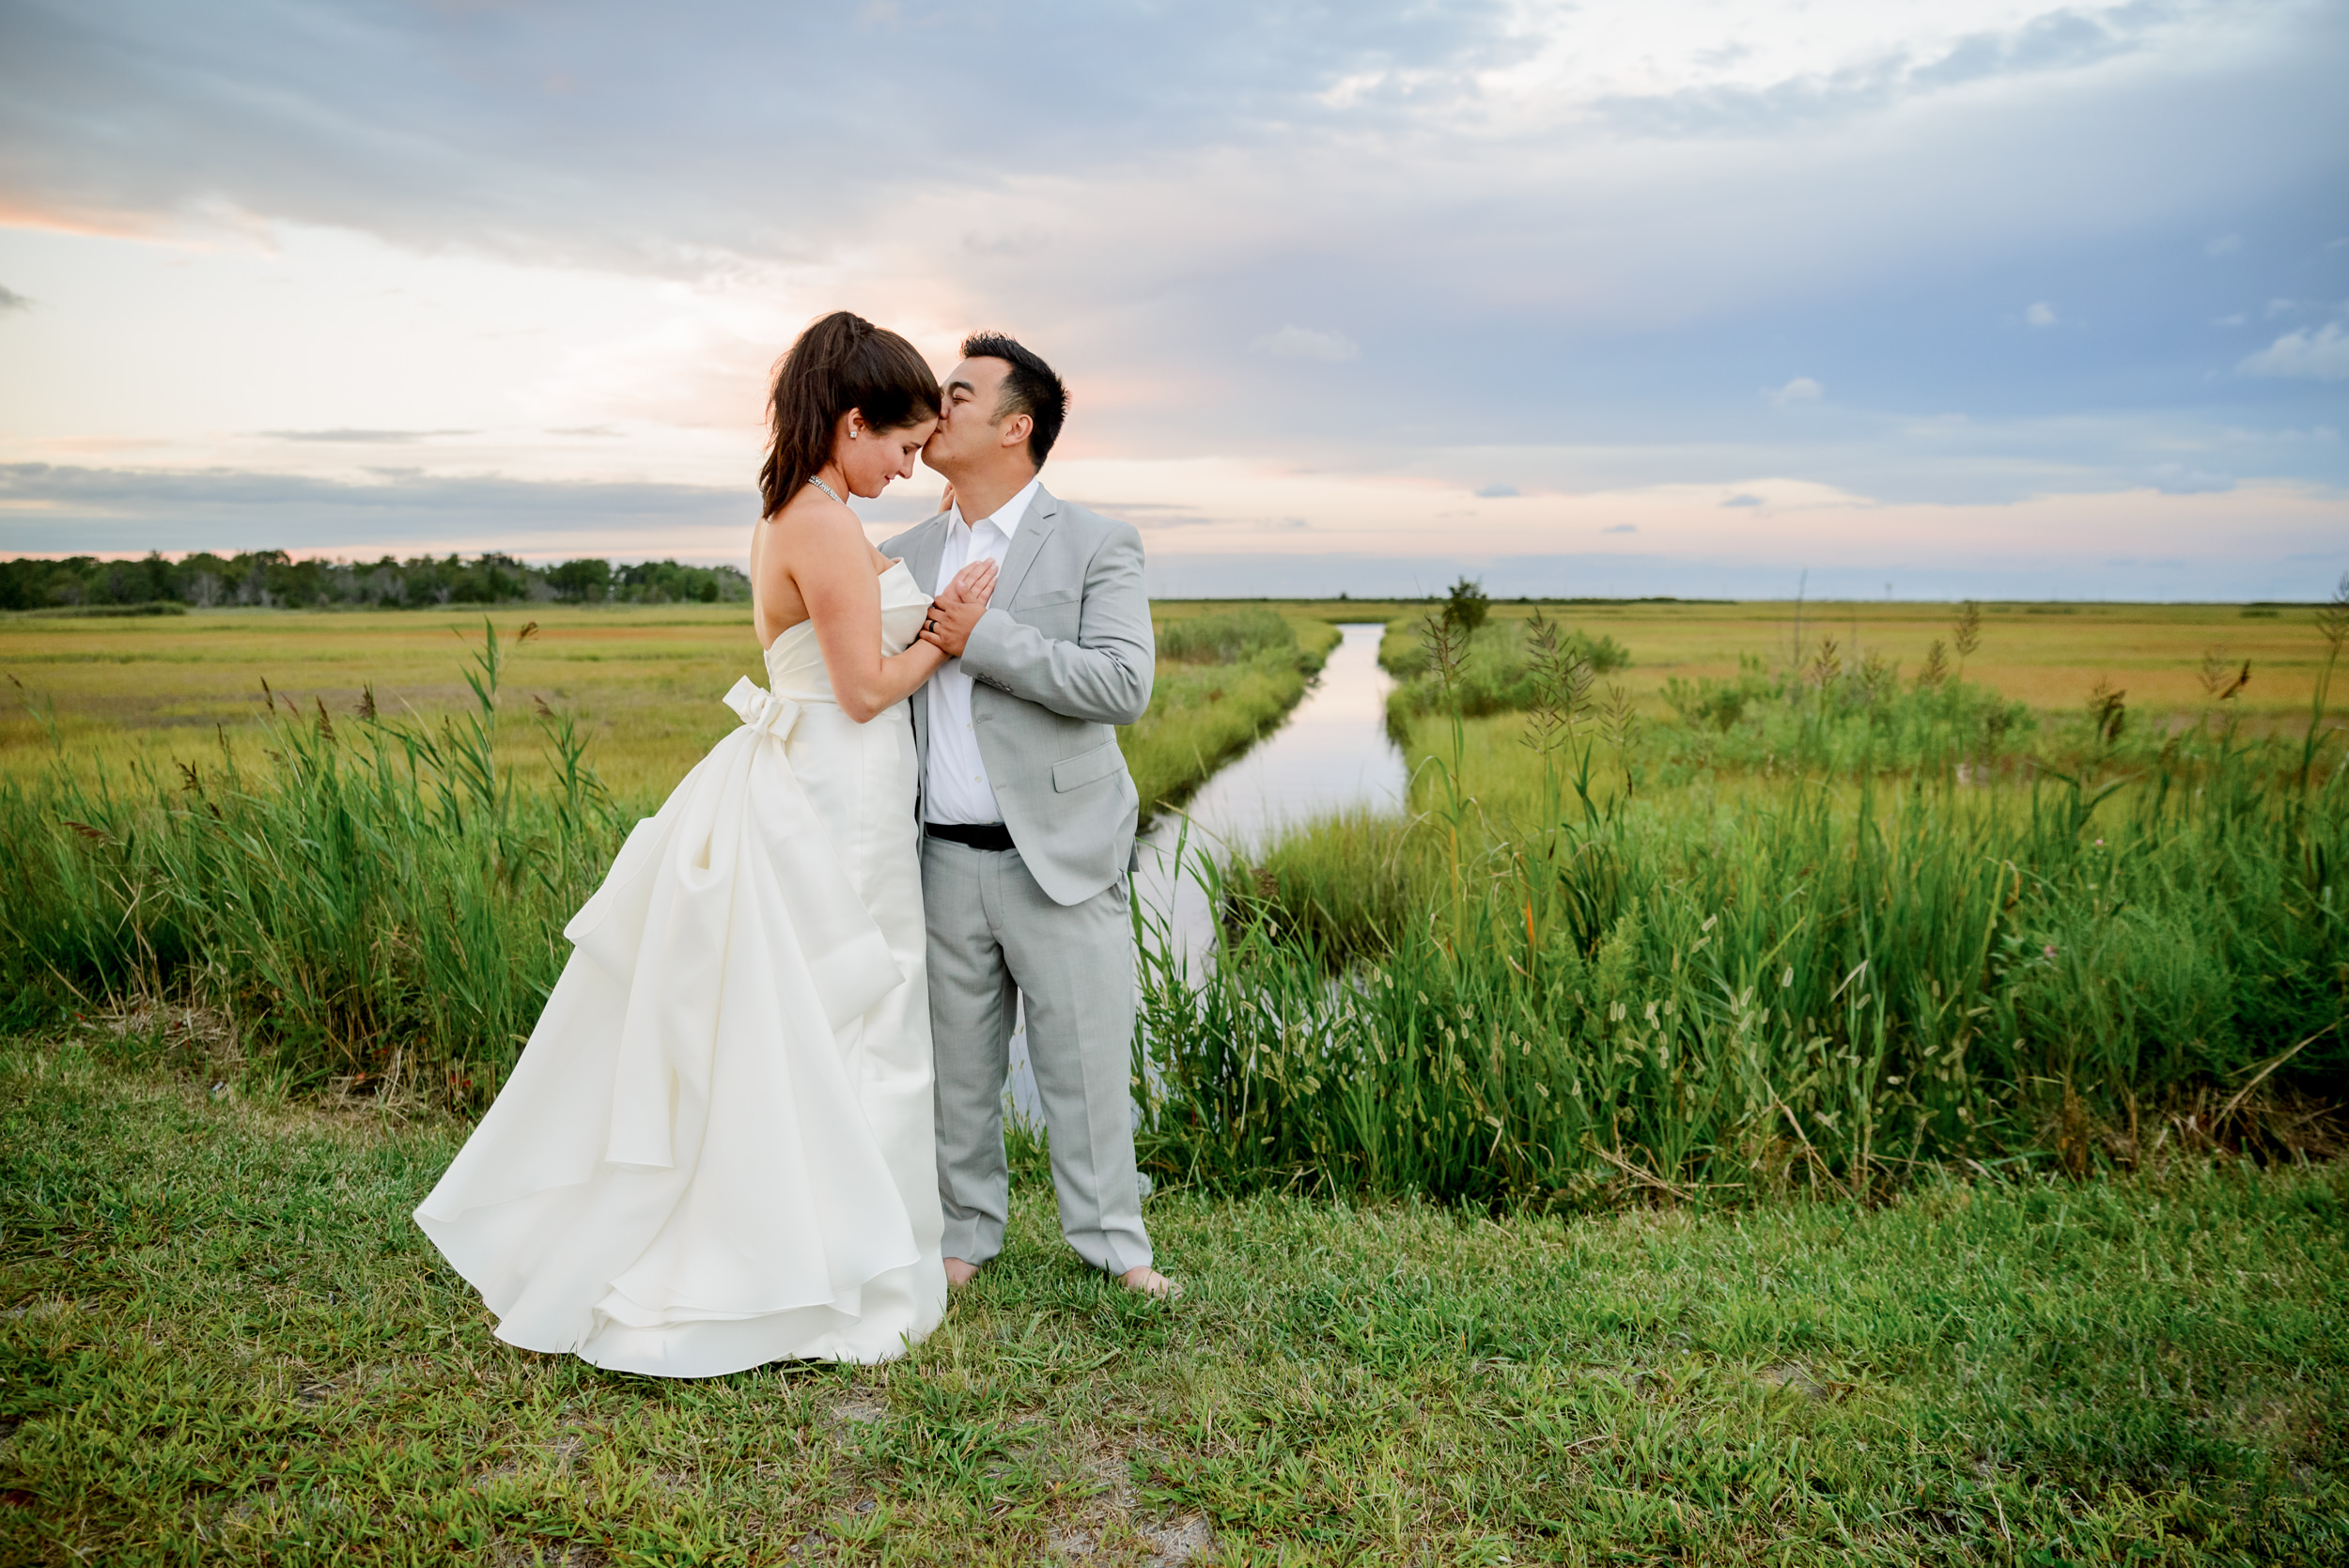 Wedding photos by the bay in Cape May, New Jersey